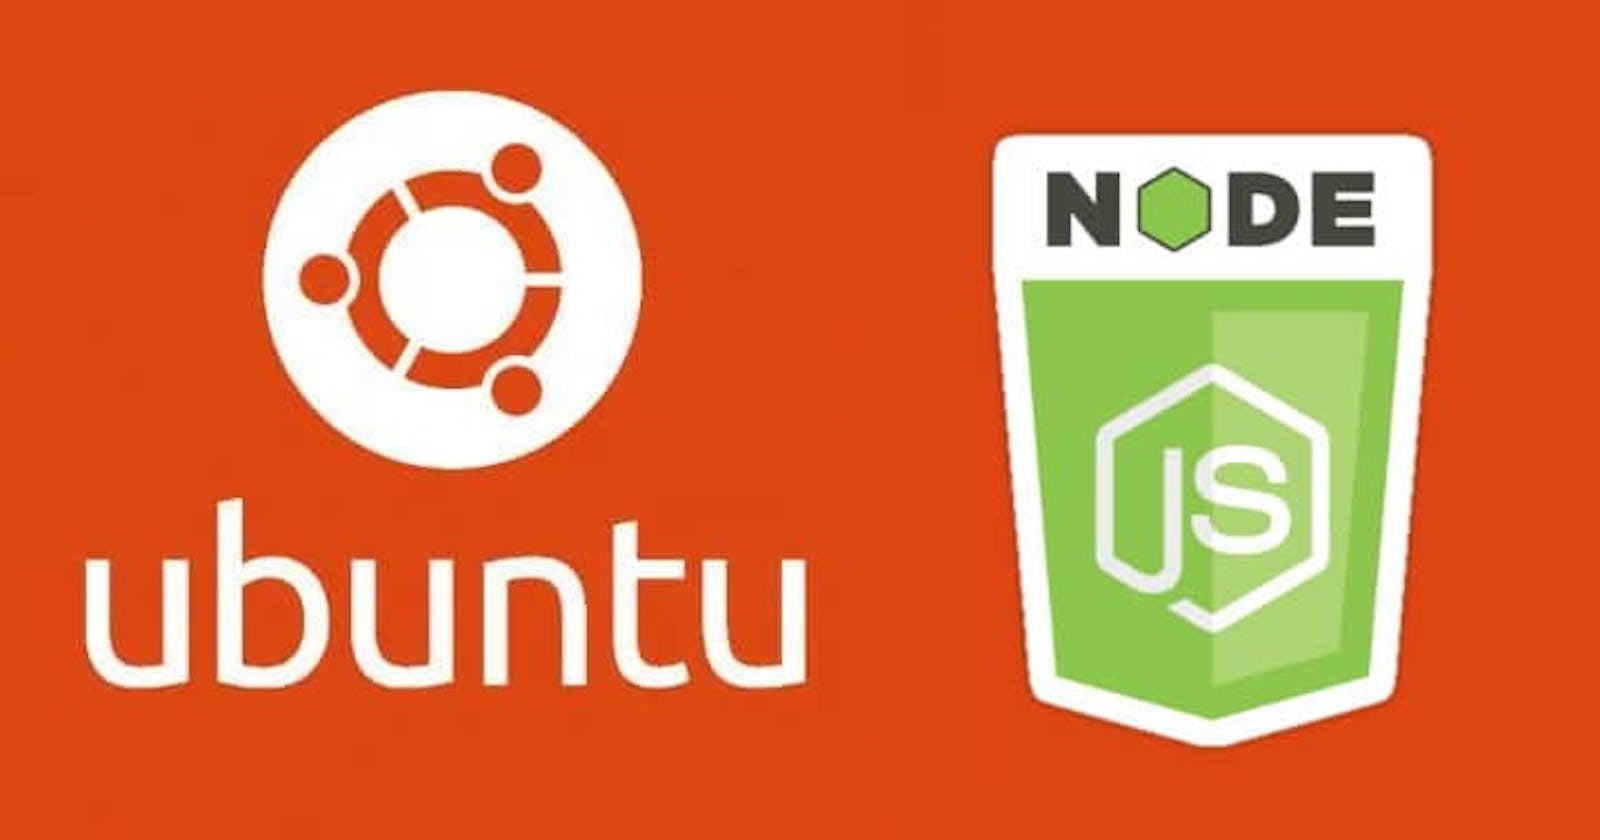 A step-by-step guide to installing Node.js on ubuntu